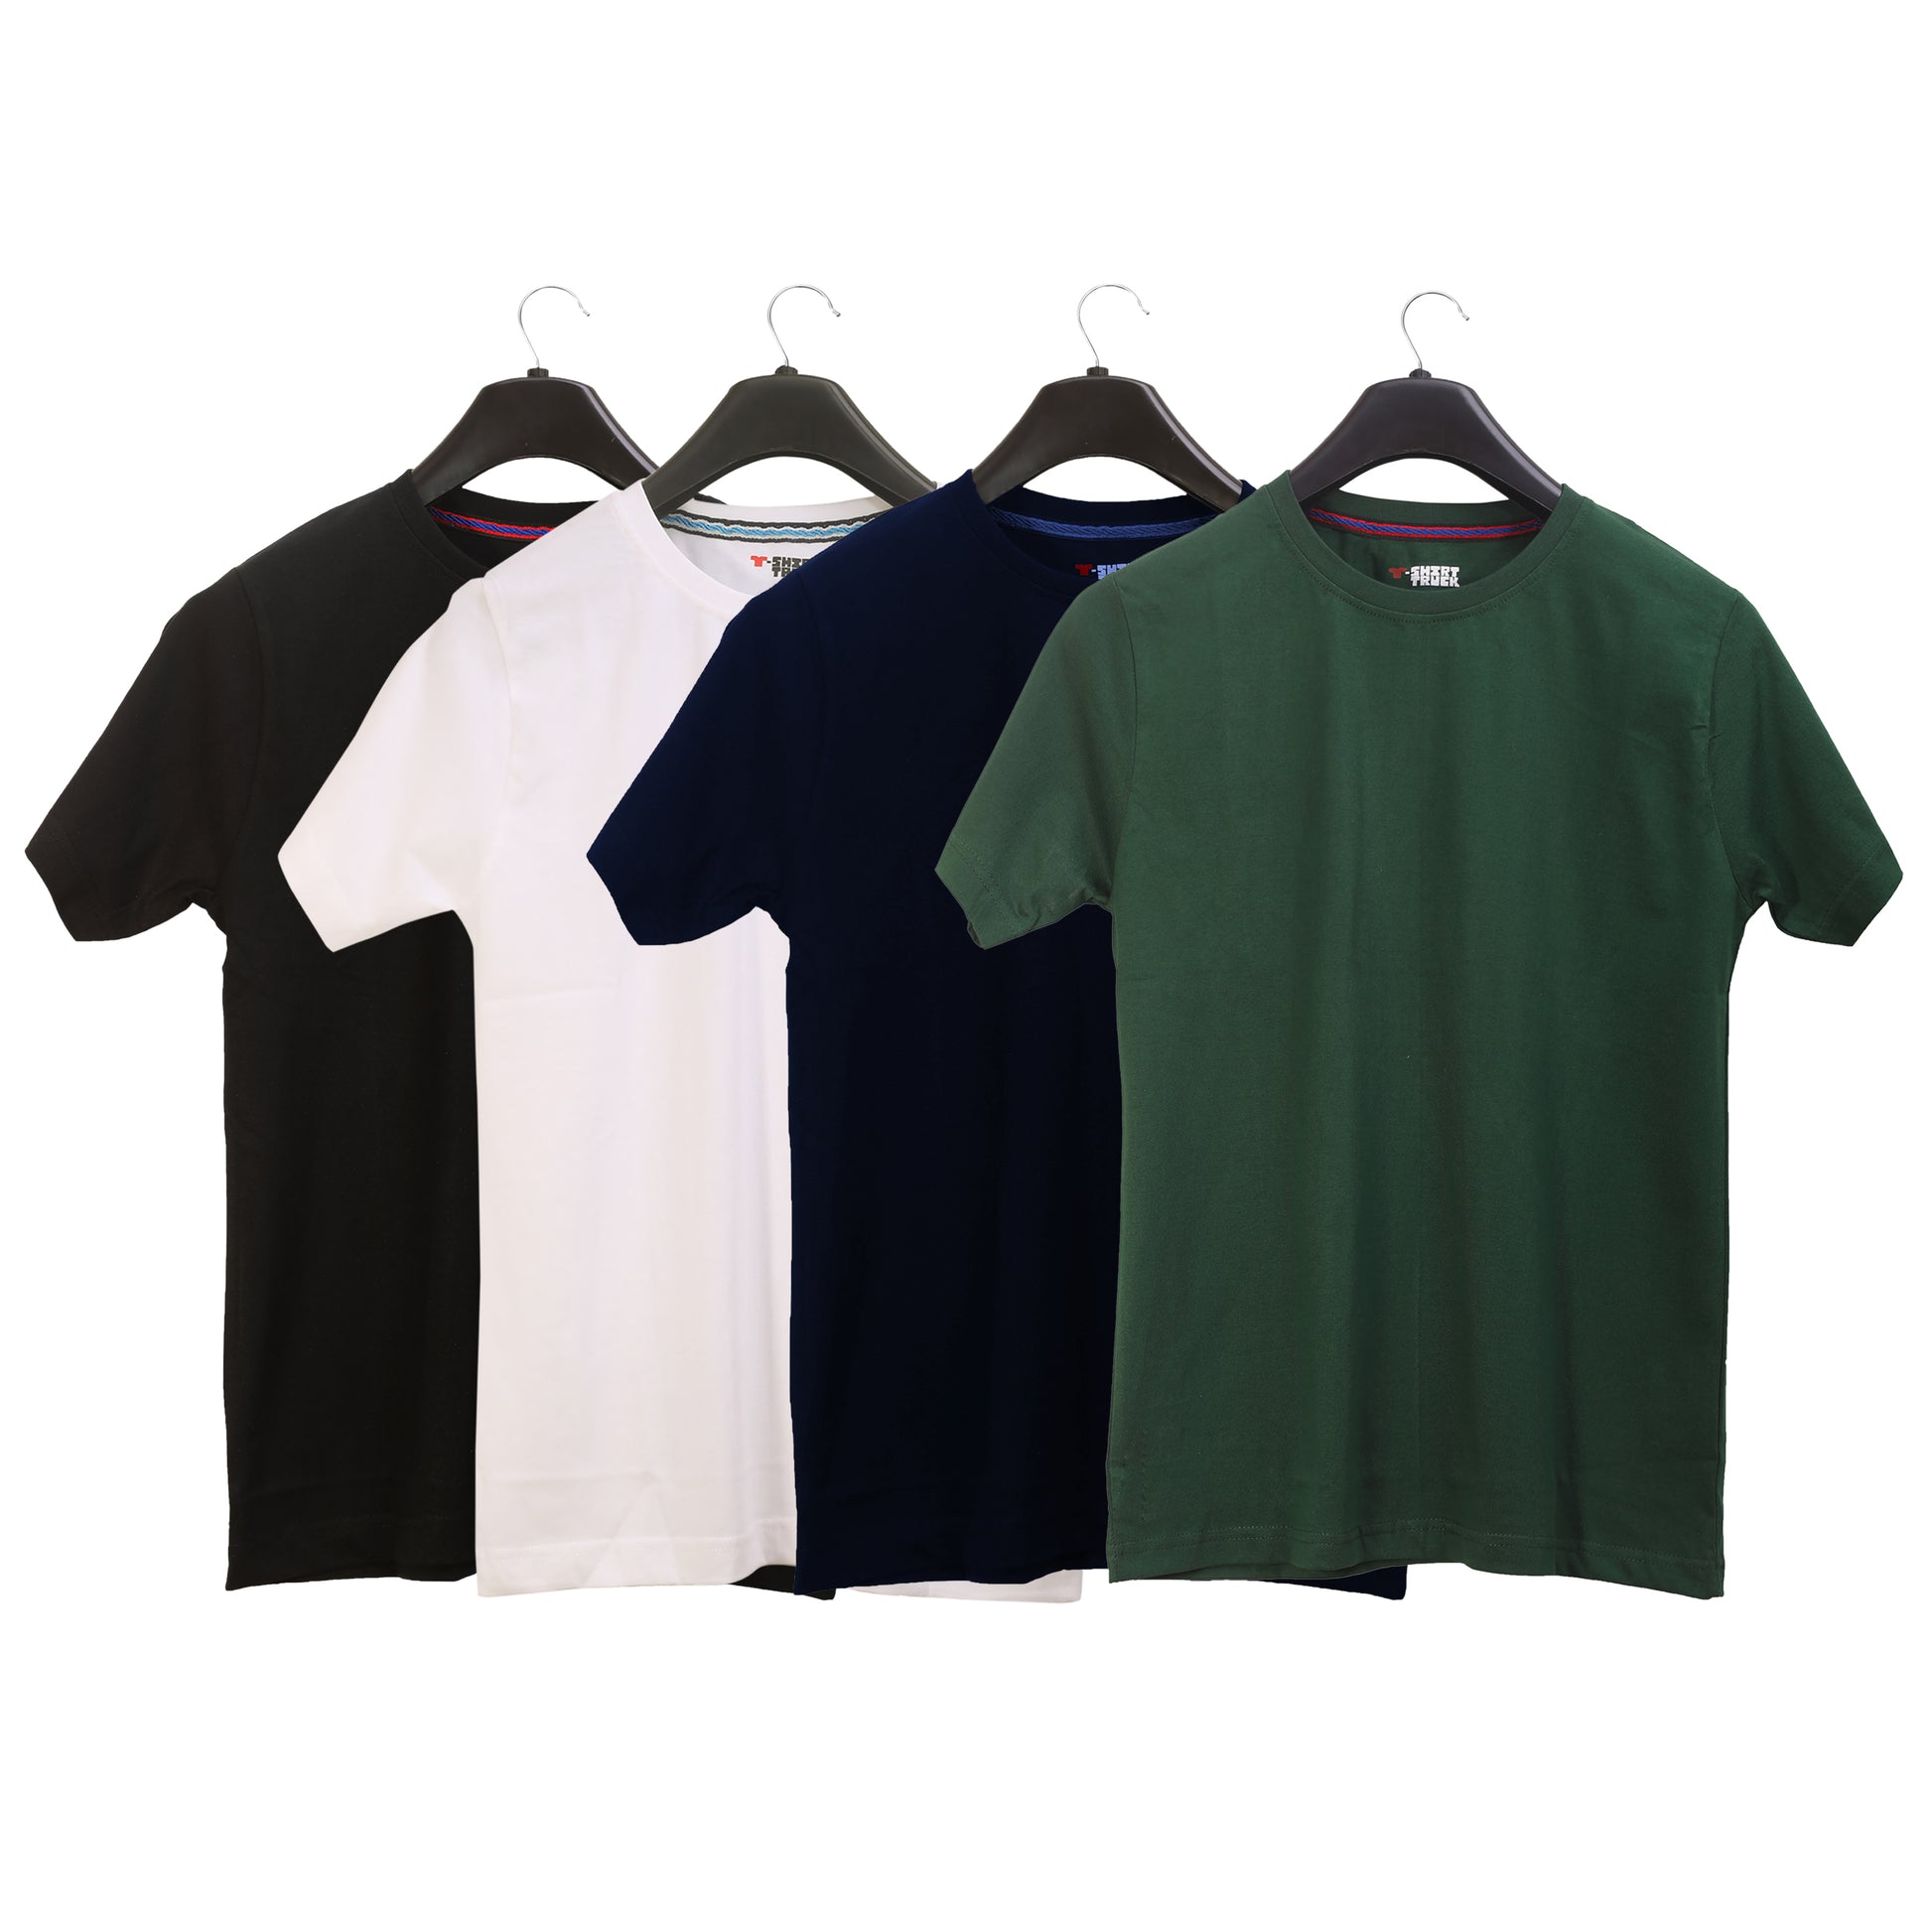 Unisex Round Neck Plain Solid Combo Pack of 4 T-shirts Black, Green, White & Yellow